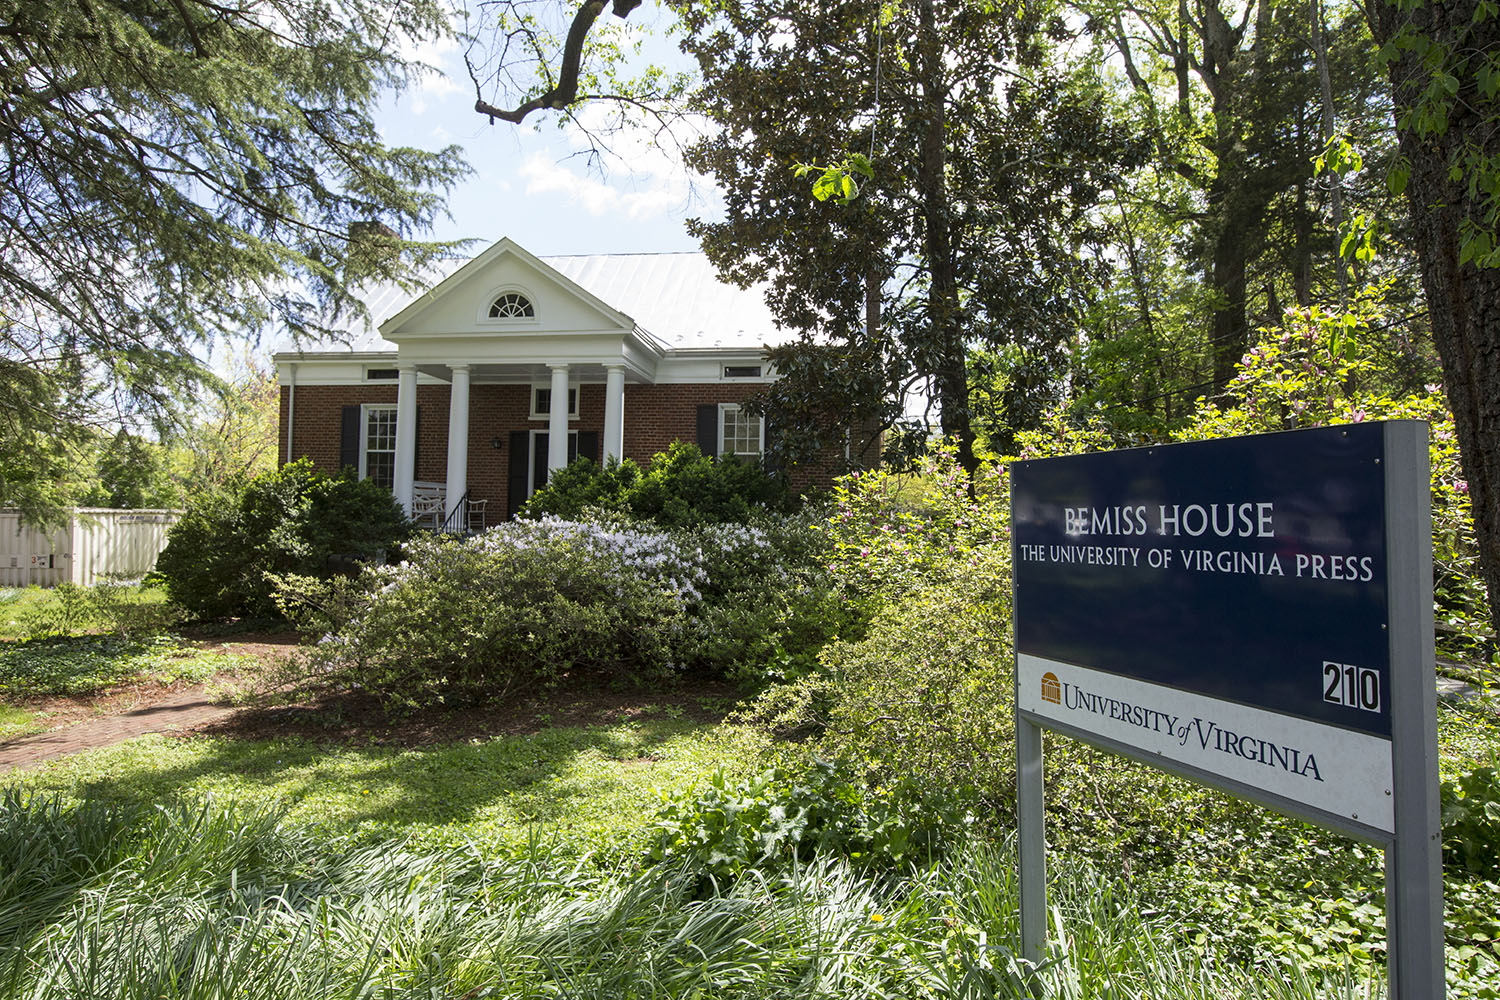 UVA Miss House sign and outside of the building which is surrounded by green plants